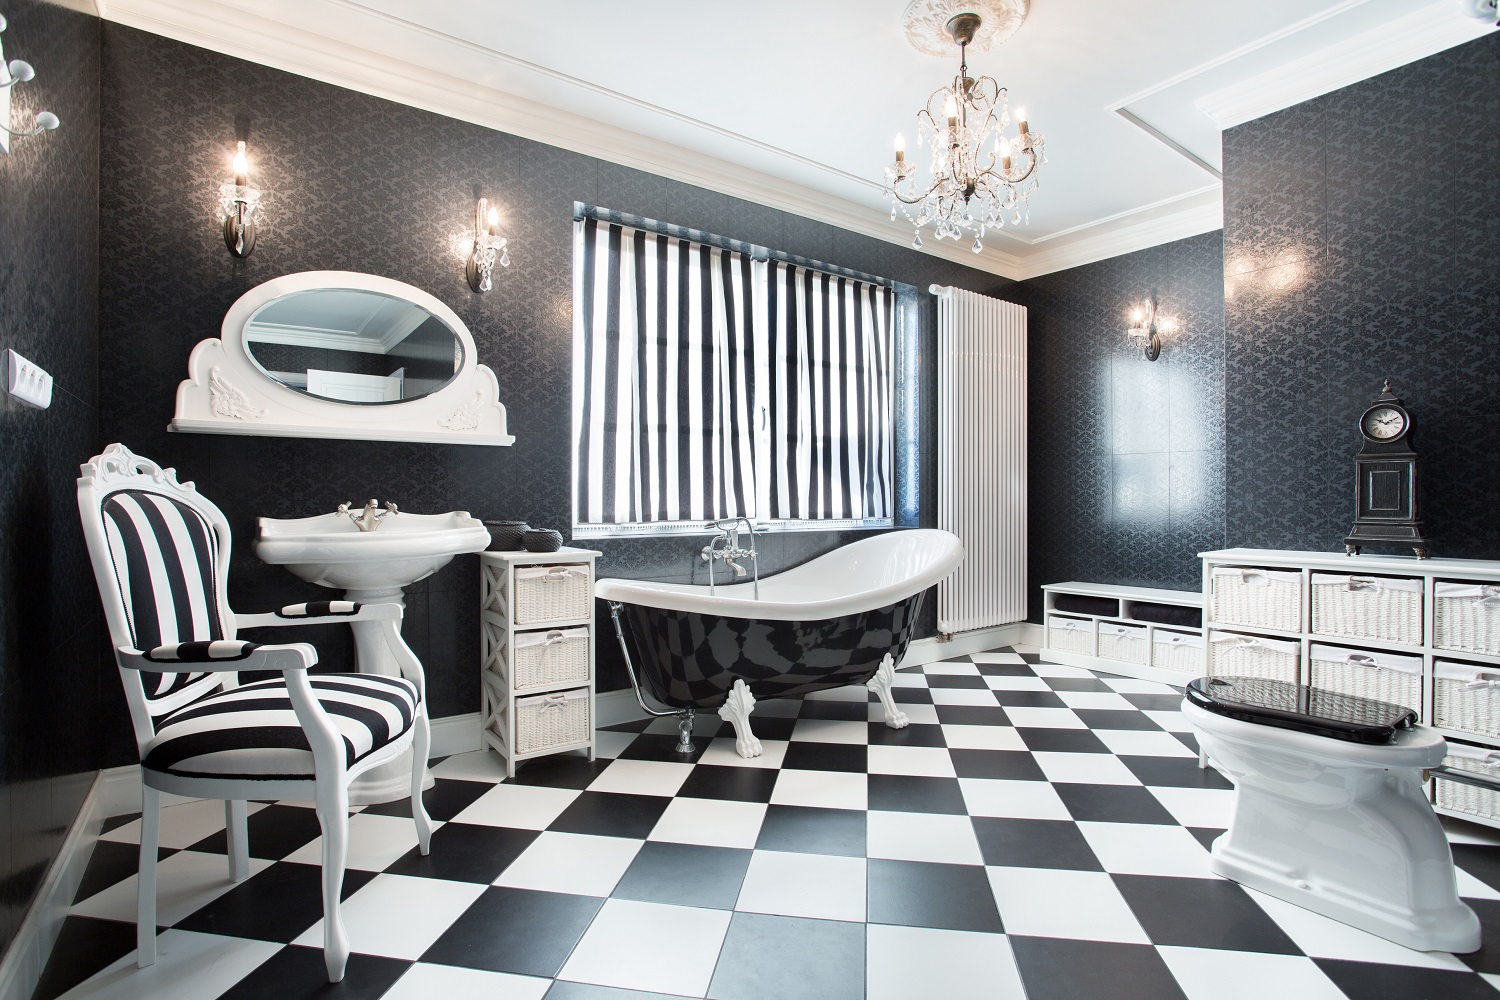 Lifestyle image of a black and white styled bathroom, with chequerboard floor tiles, striped chair, black patterned walls, a black slipper bath with painted white clawfeet and a white toilet with a black toilet seat, among other black and white bits and pieces